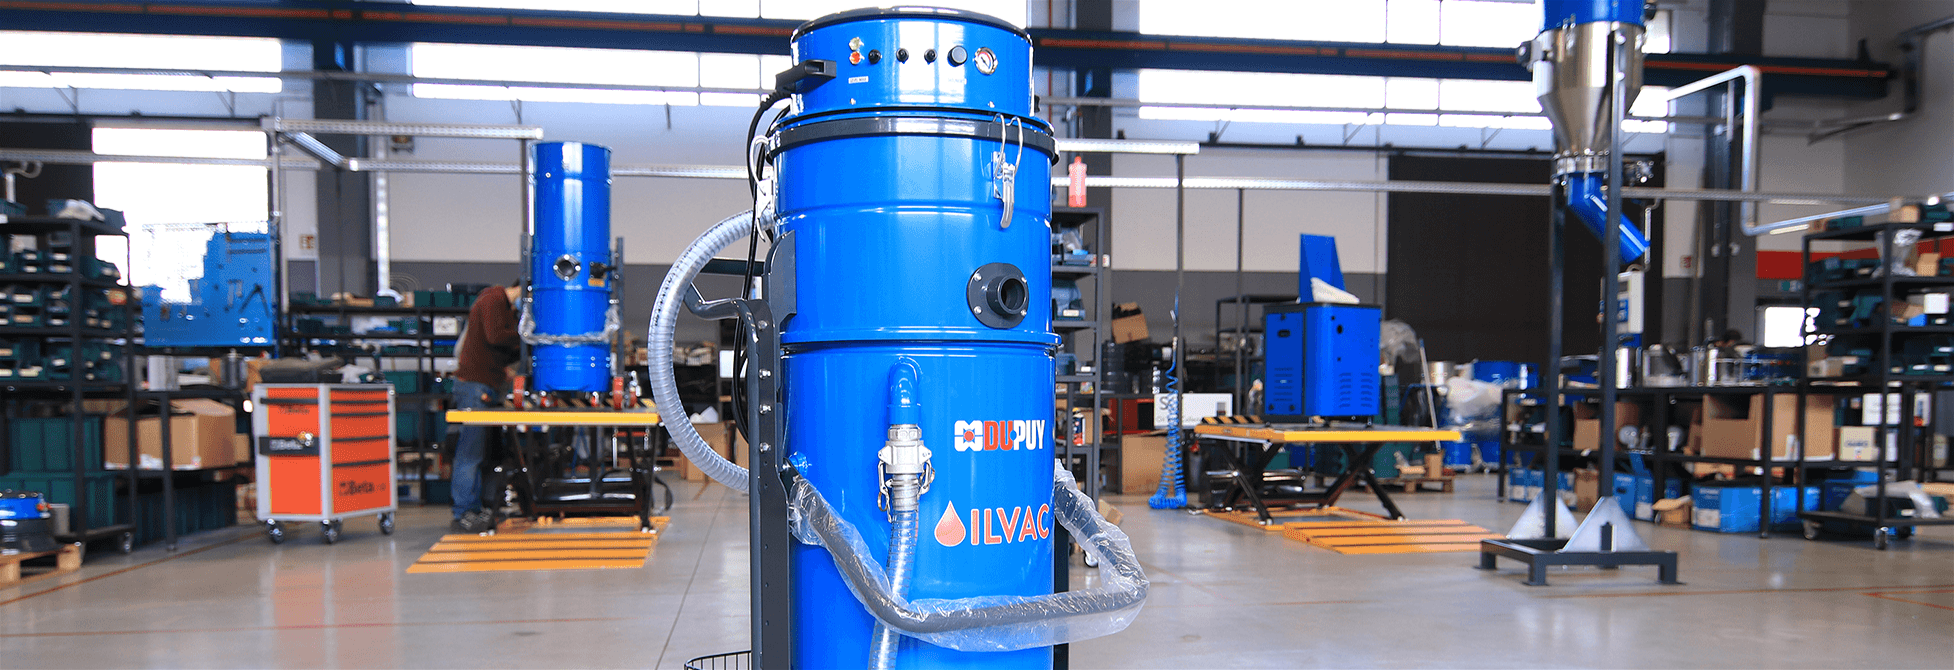 Oilvac 130 New vacuum cleaner for mechanical industry| DU-PUY